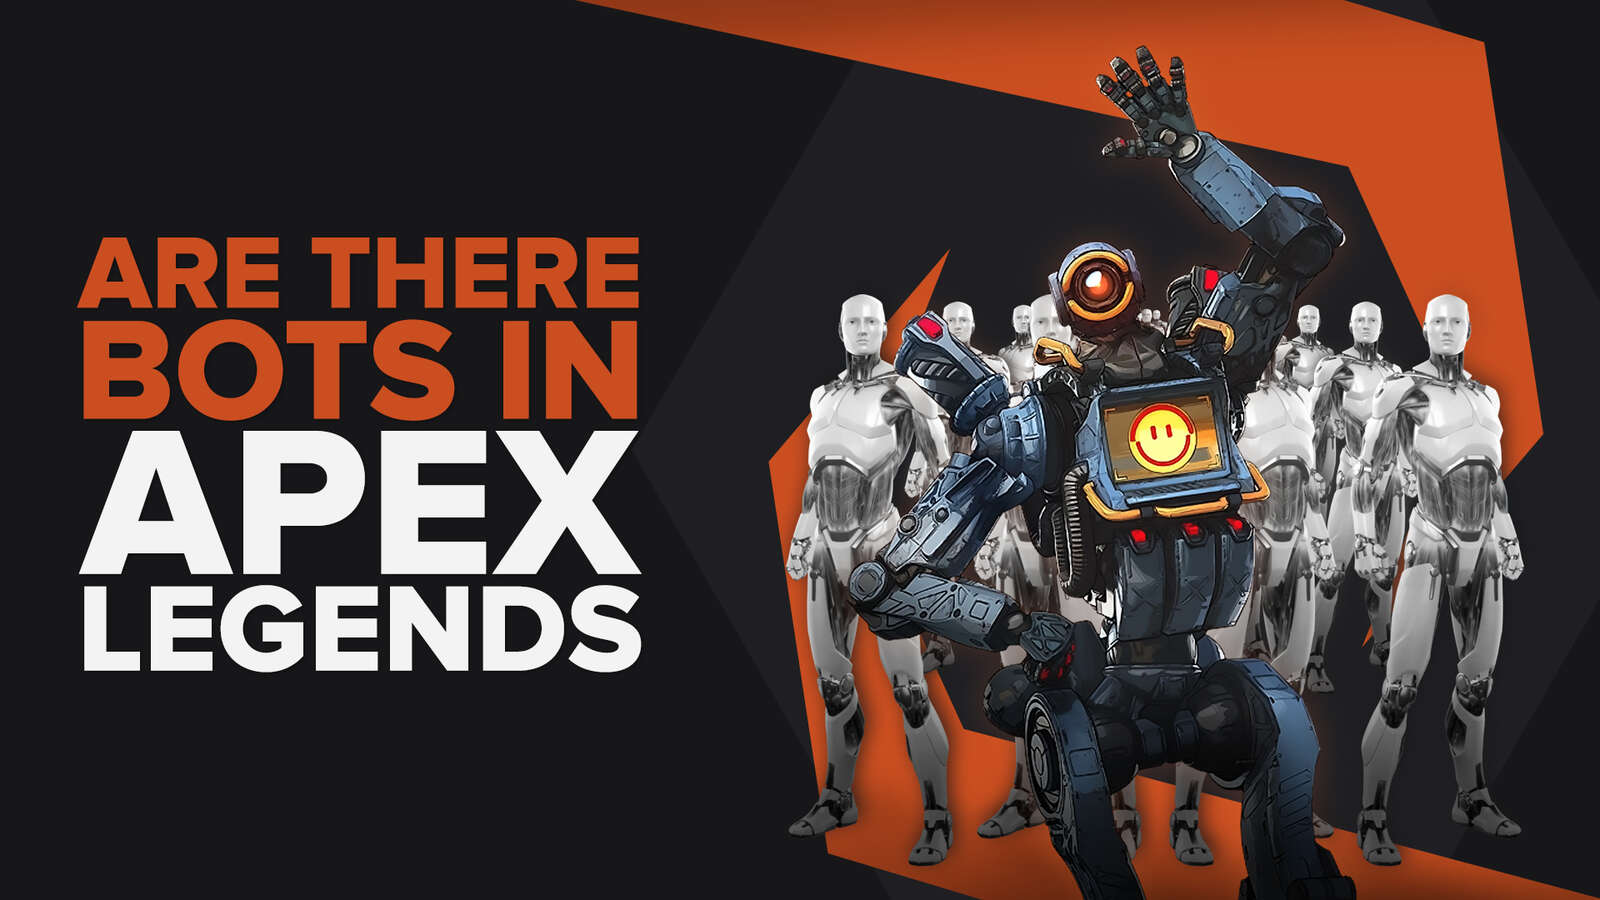 Are There Bots In Apex Legends? Mystery Solved